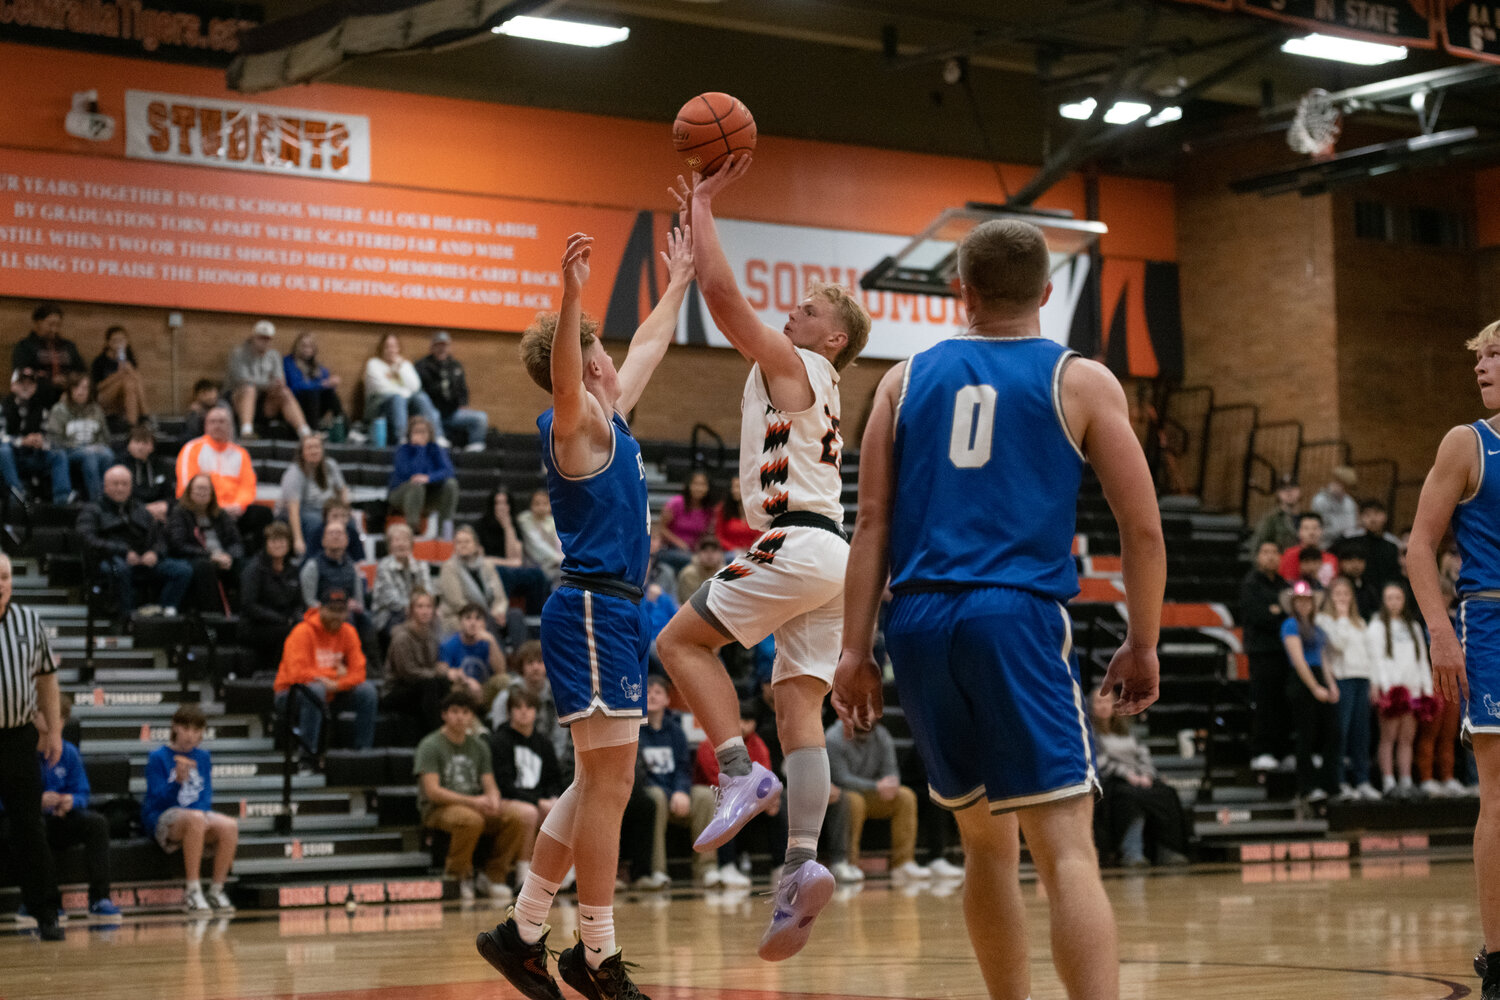 Von Wasson shoots a jumper during the first half of Centralia's 64-60 loss to Elma on Dec. 4.